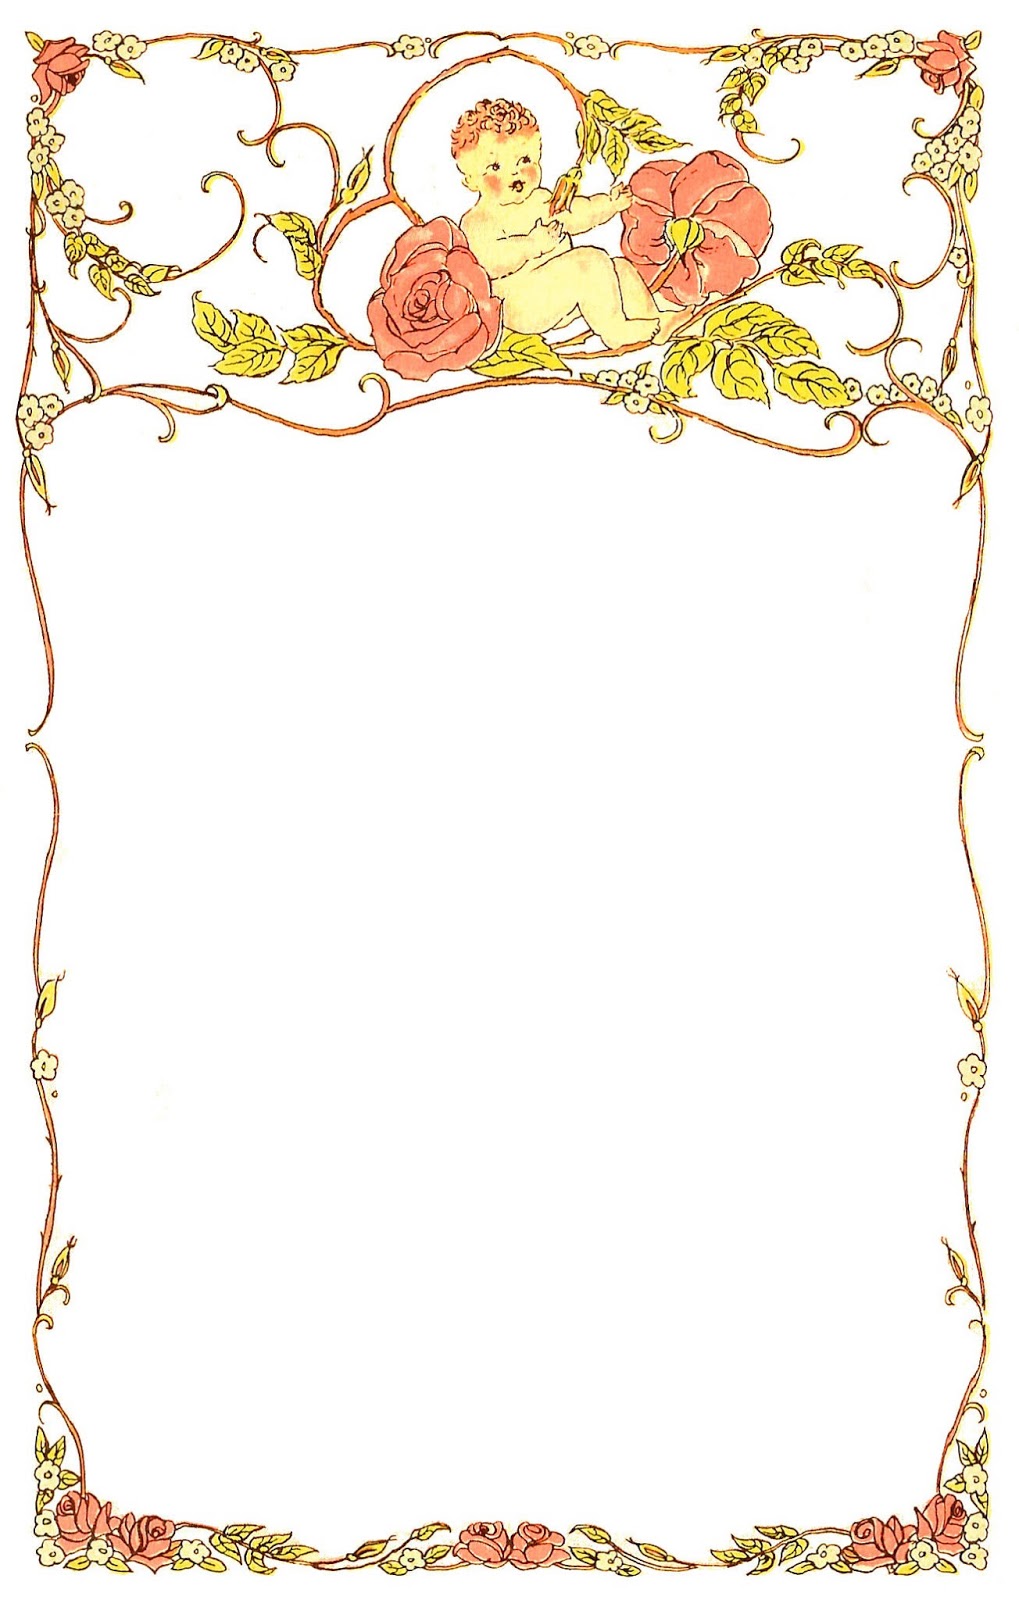 Antique Images  Free Printable Digital Frame  Baby And Roses Design